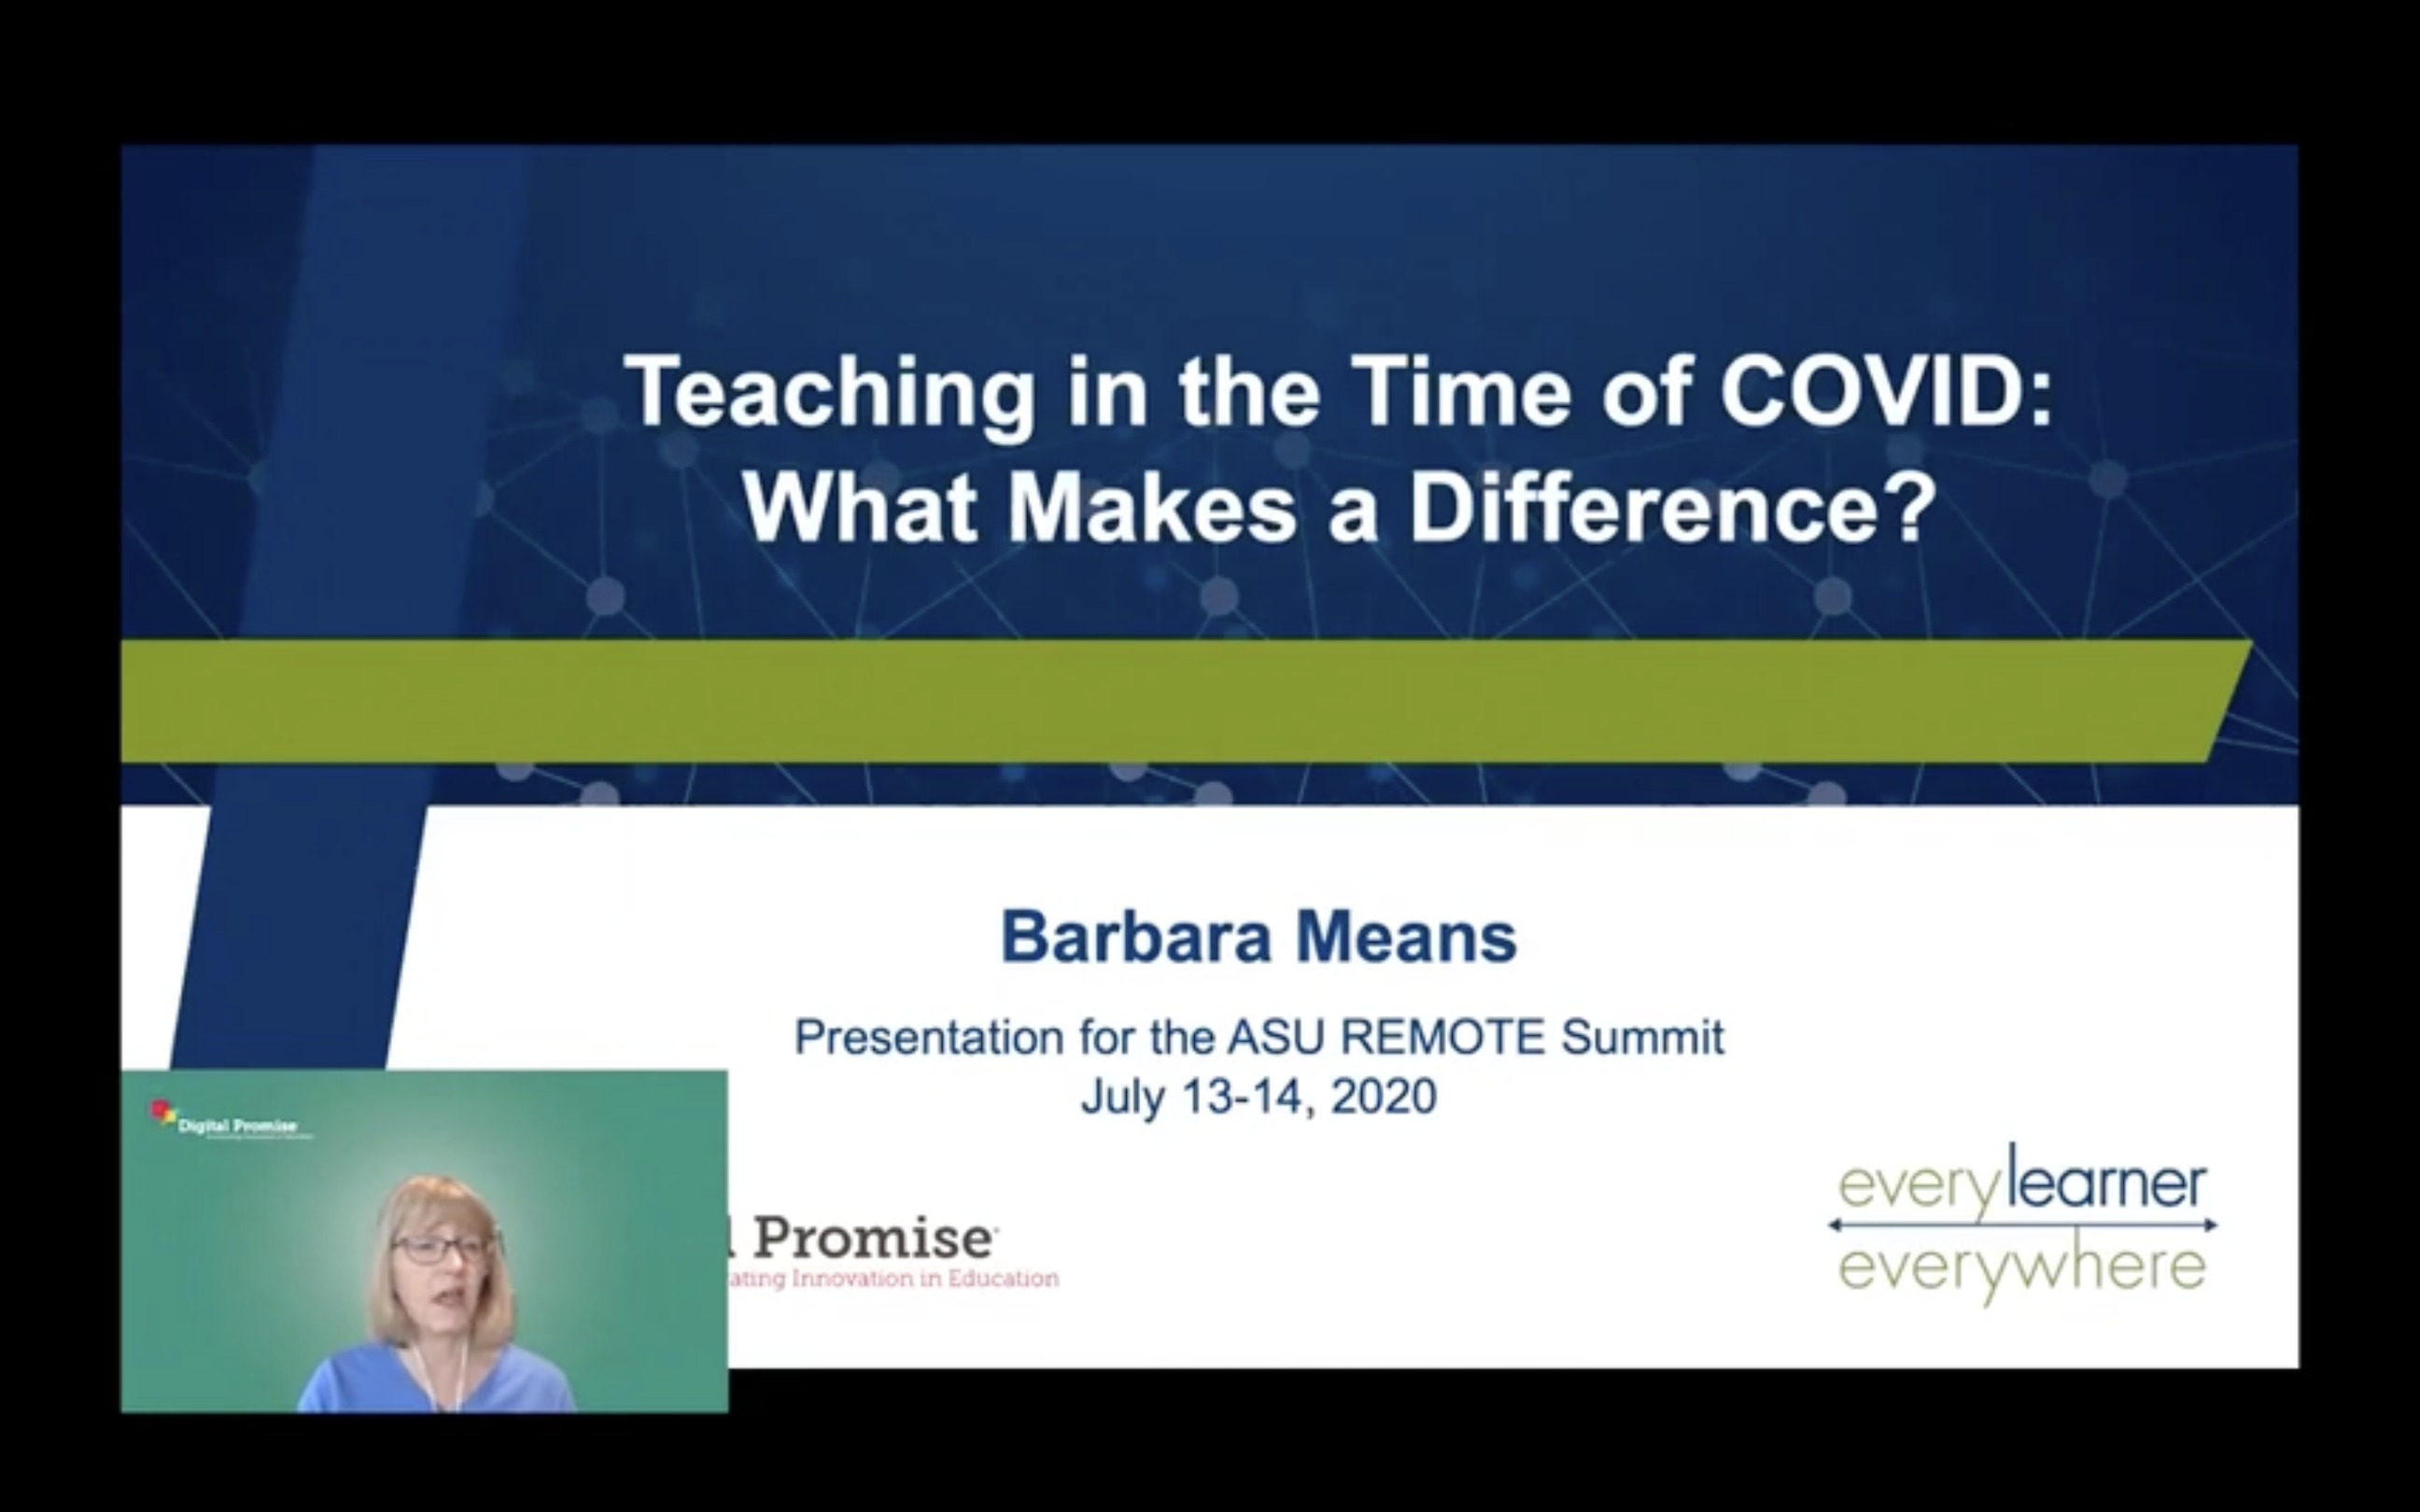 Teaching in the Time of COVID thumbnail